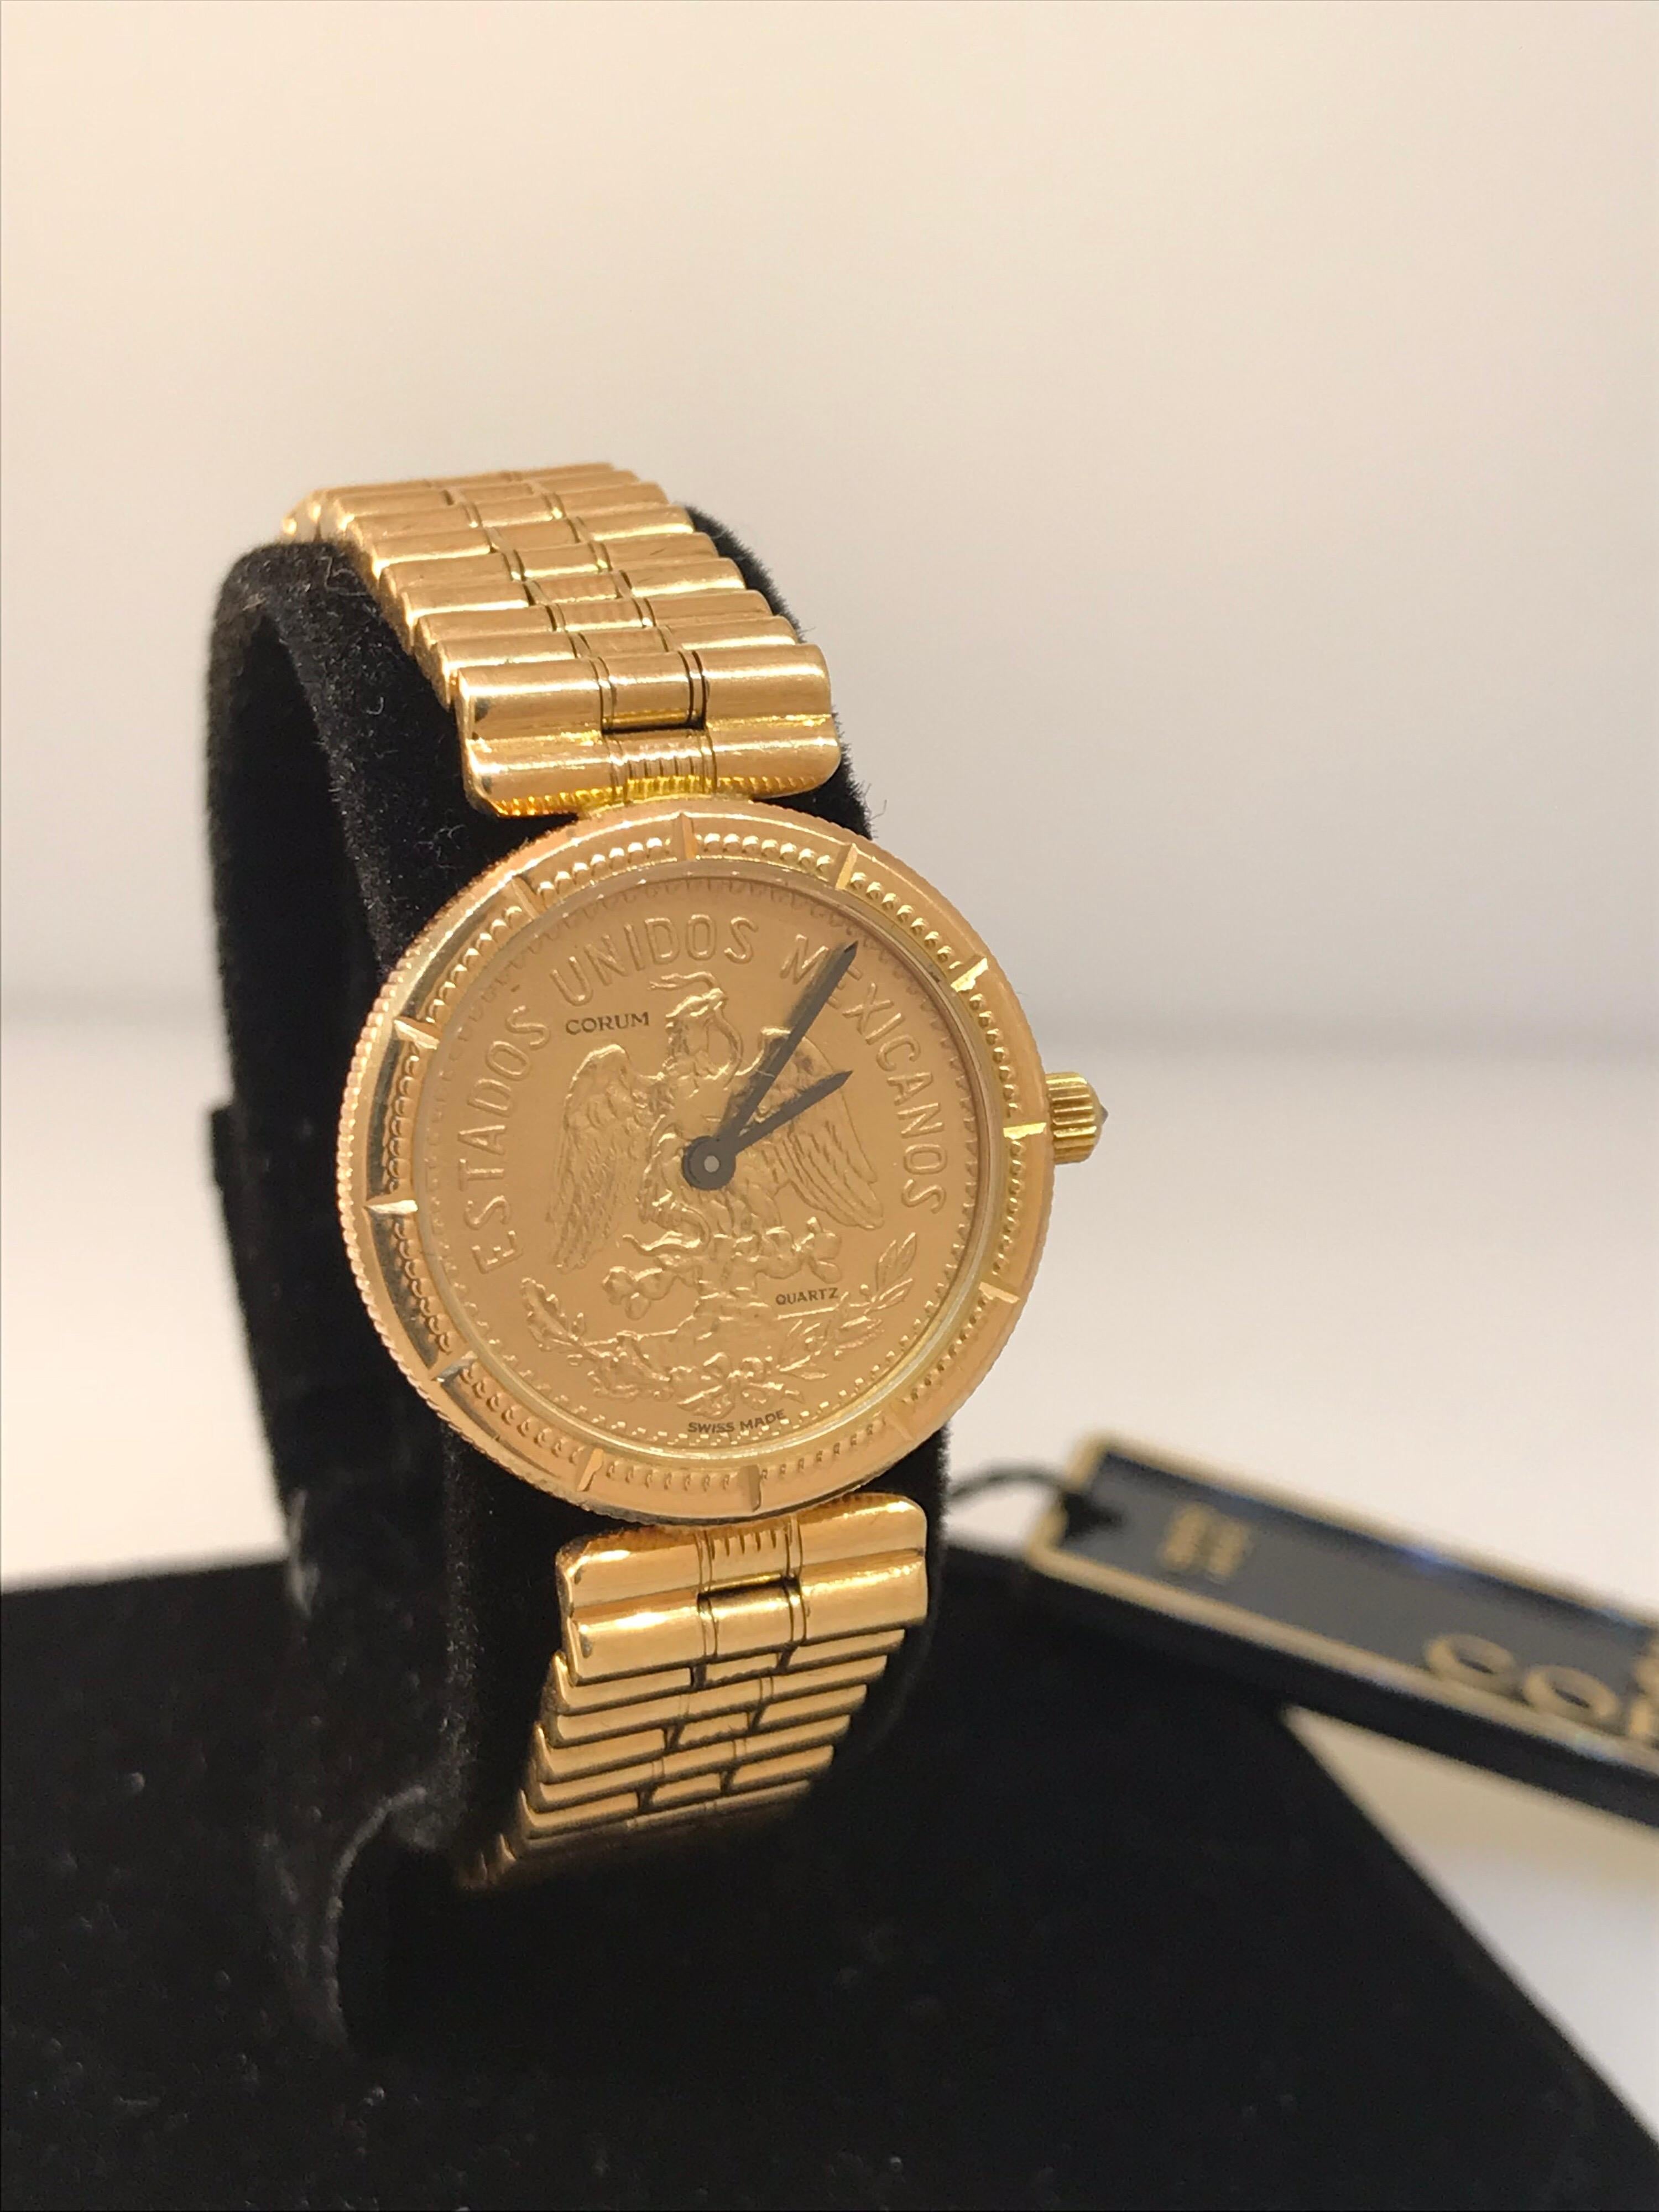 Corum Gold Coin Ladies Watch

Model Number: 3034856

100% Authentic

New / Old Stock

Comes with a generic Watch Box

18 Karat Yellow Gold Case & Bracelet

Case Diameter: 20mm

Last Known Retail was $17,950

